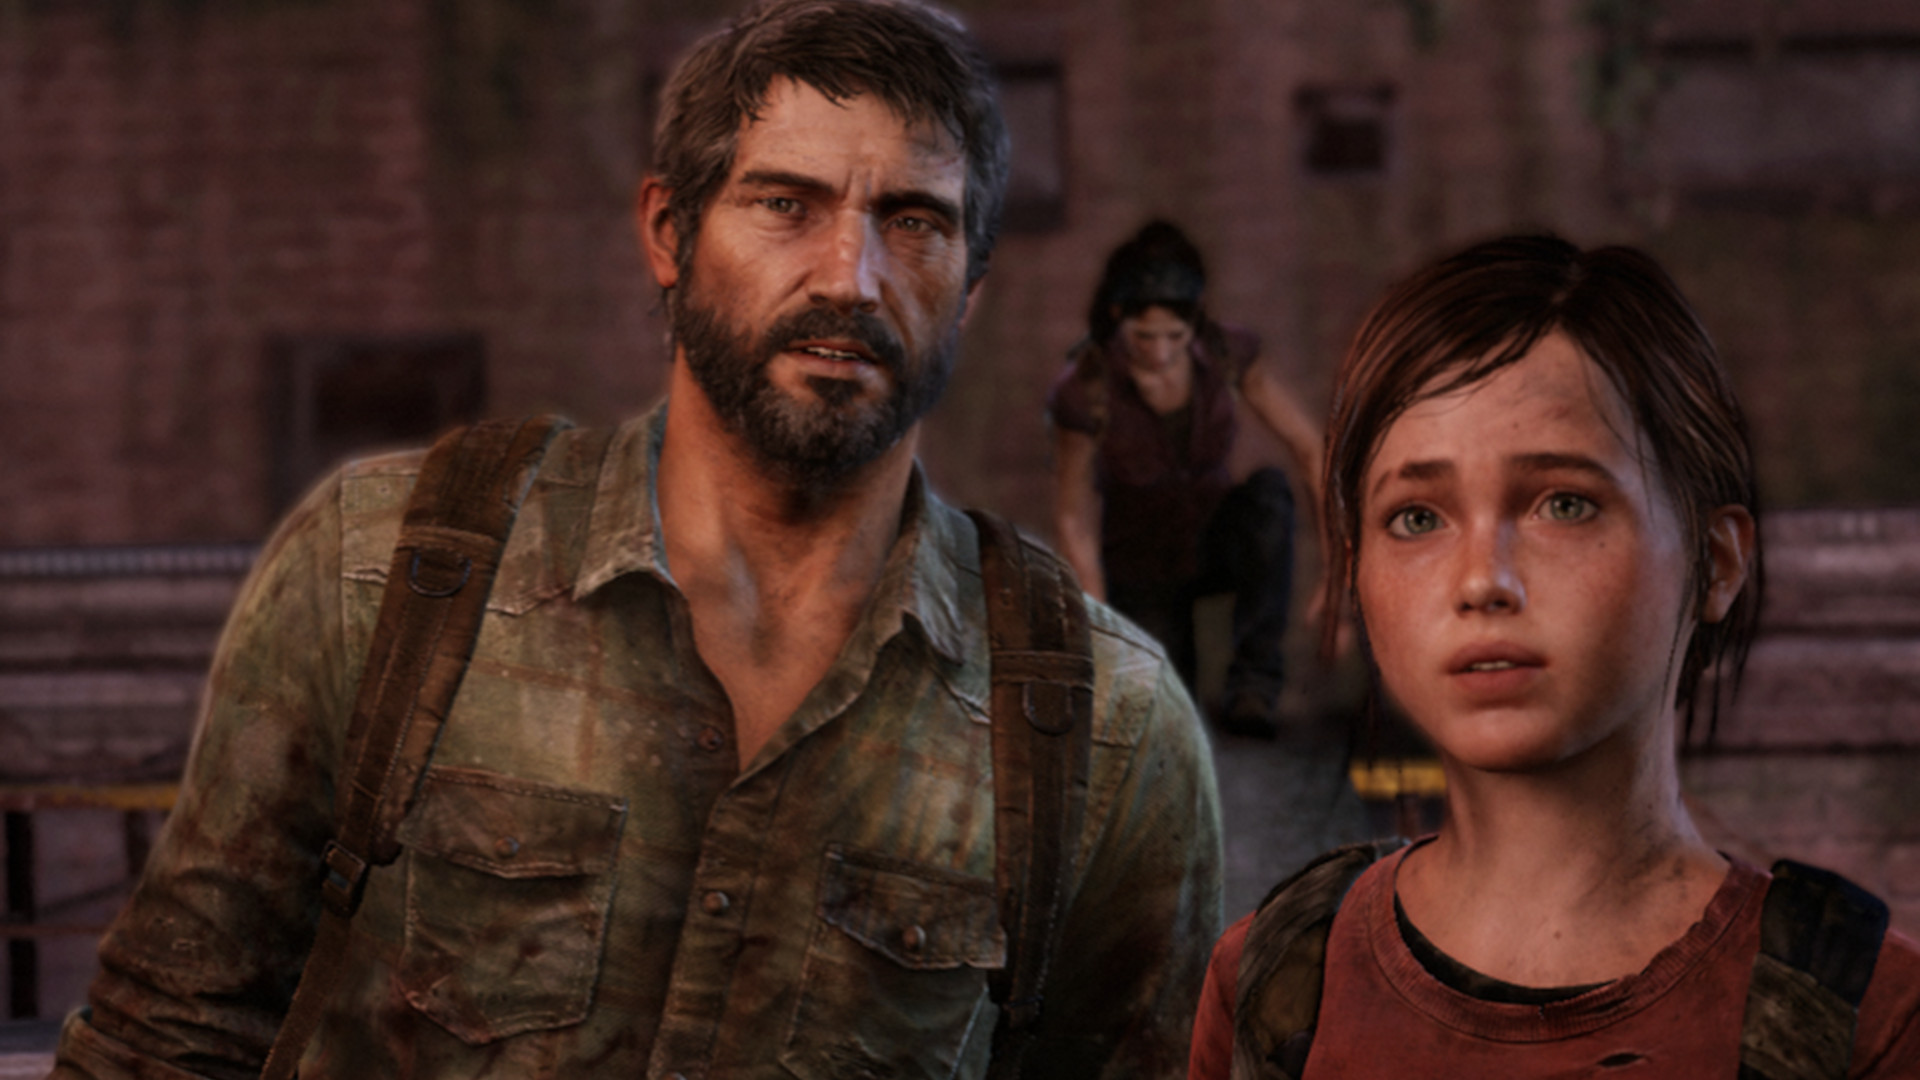 the-last-of-us-tv-series-image-has-joel-and-ellie-avoiding-a-clicker